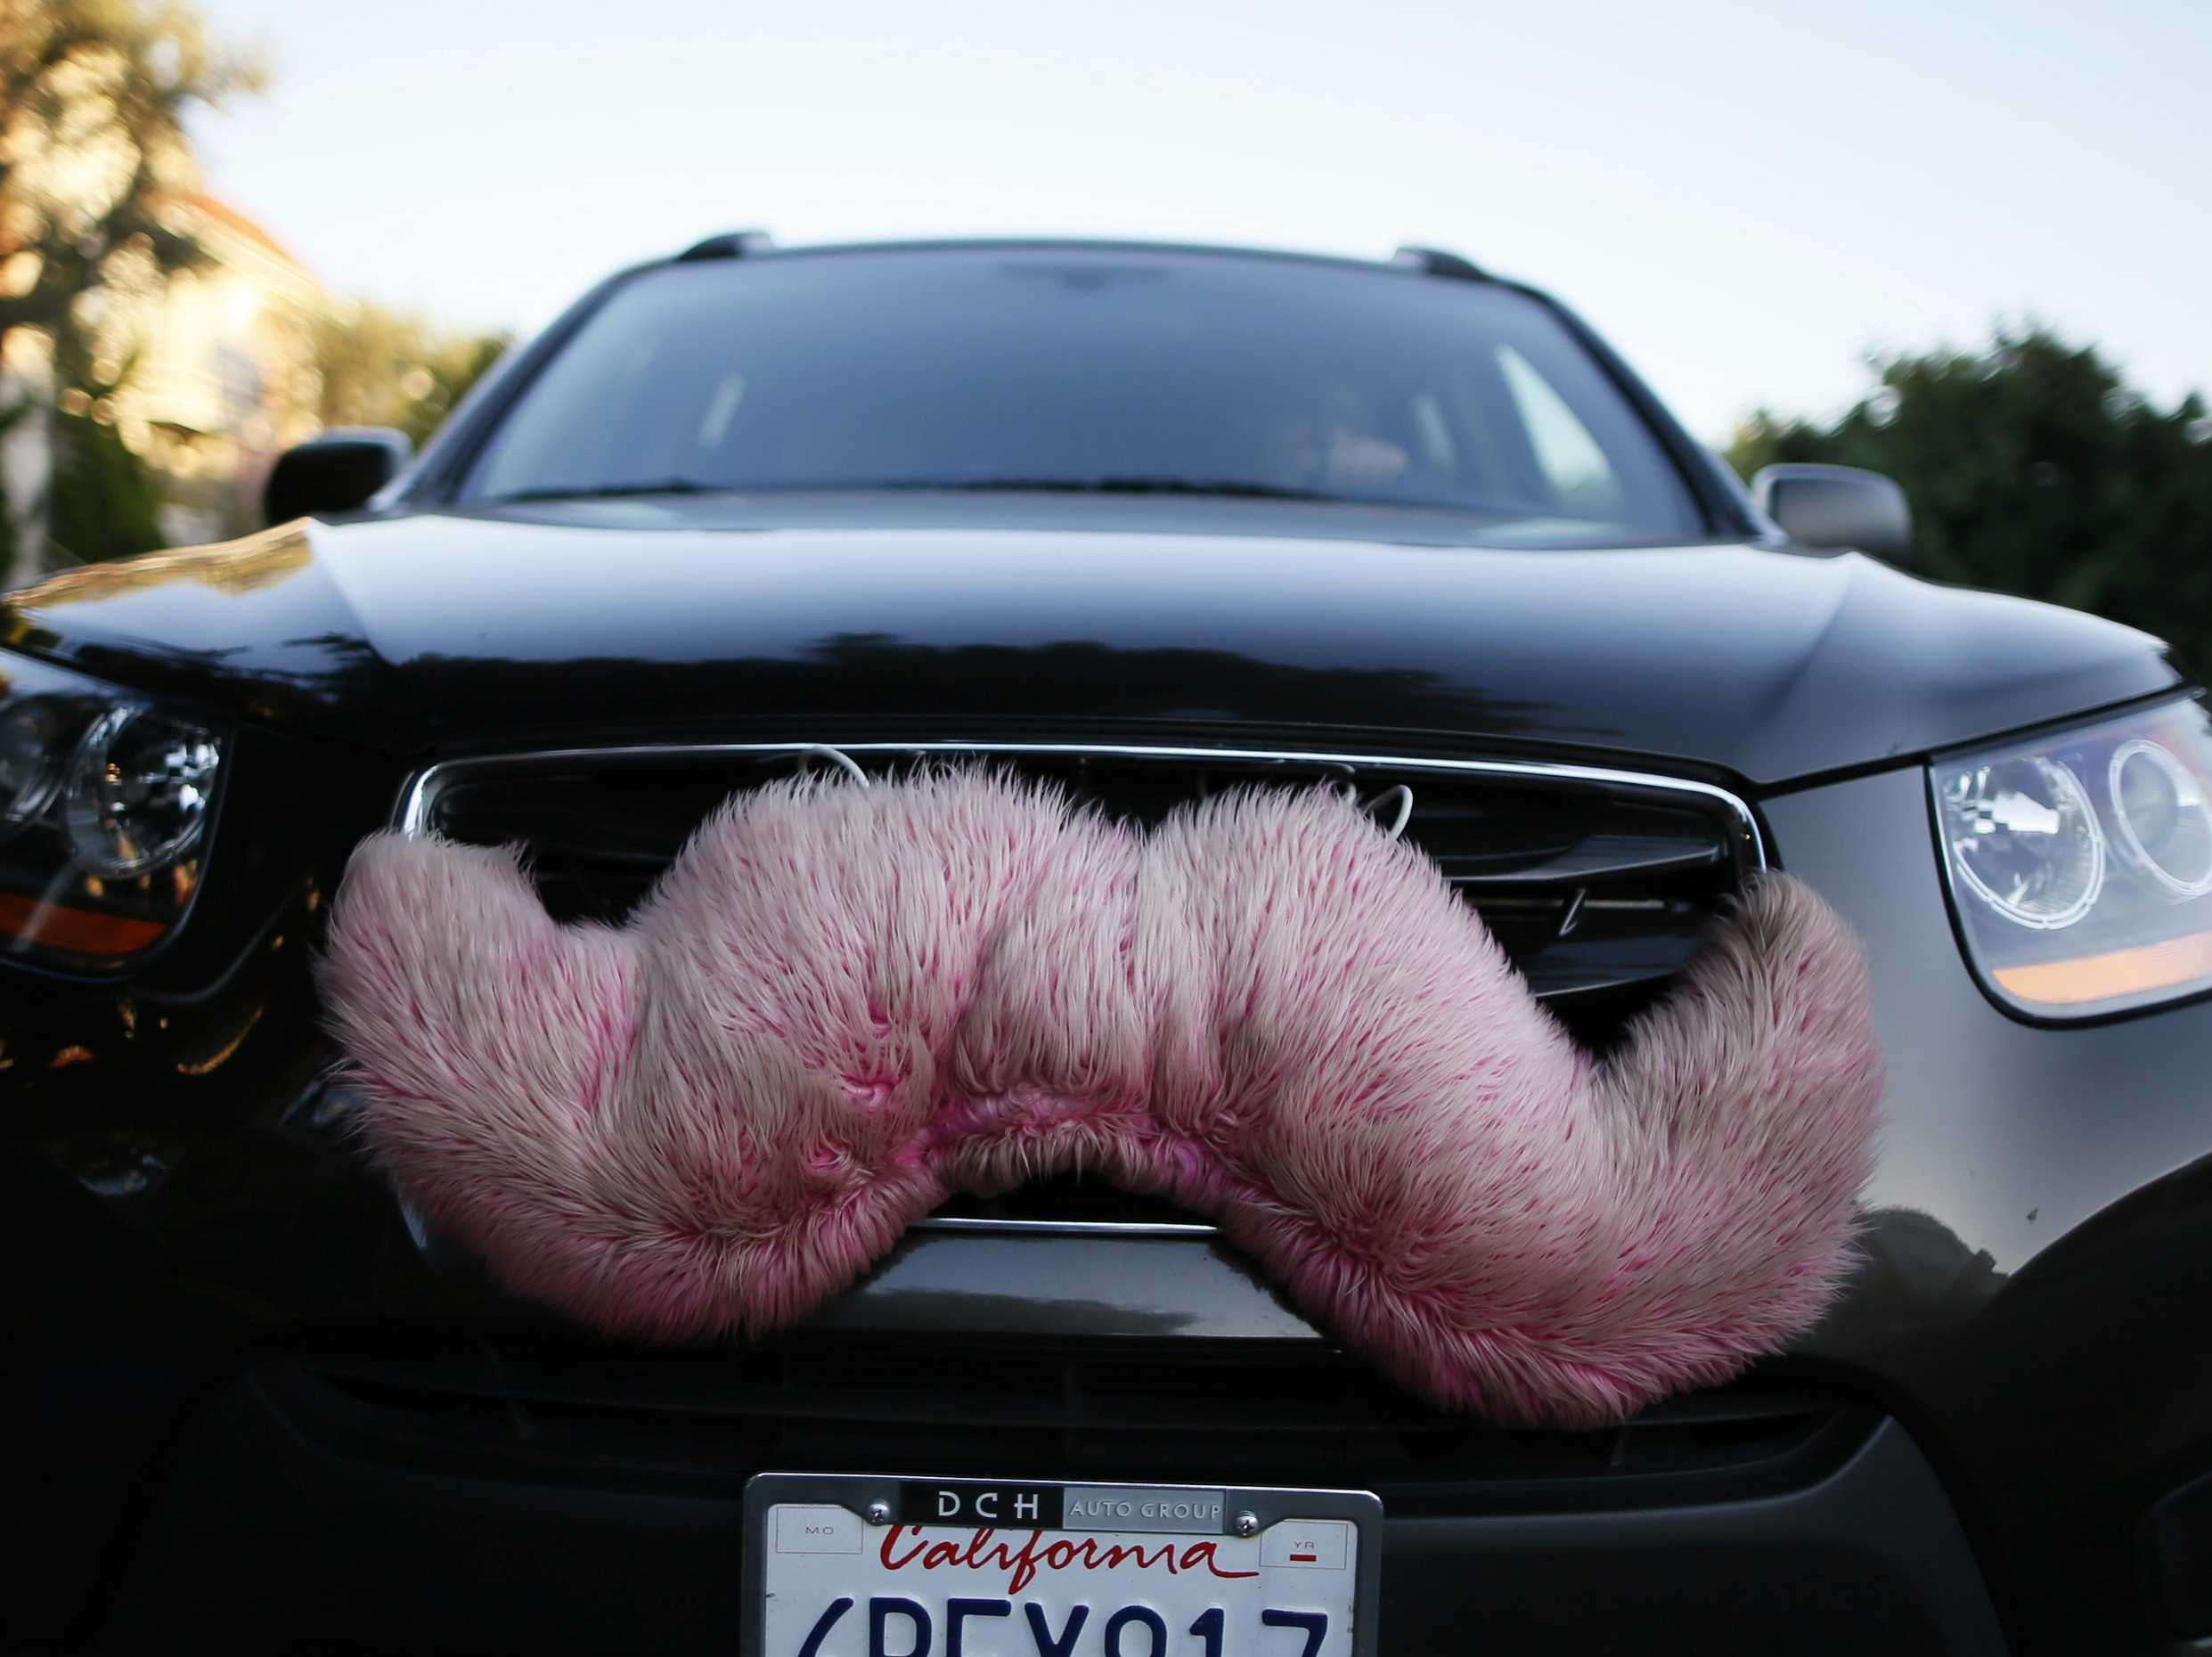 Pink Mustache Lyft Logo - Lyft Is Getting Rid Of Its Trademark Pink Mustache For A Less-Cuddly ...